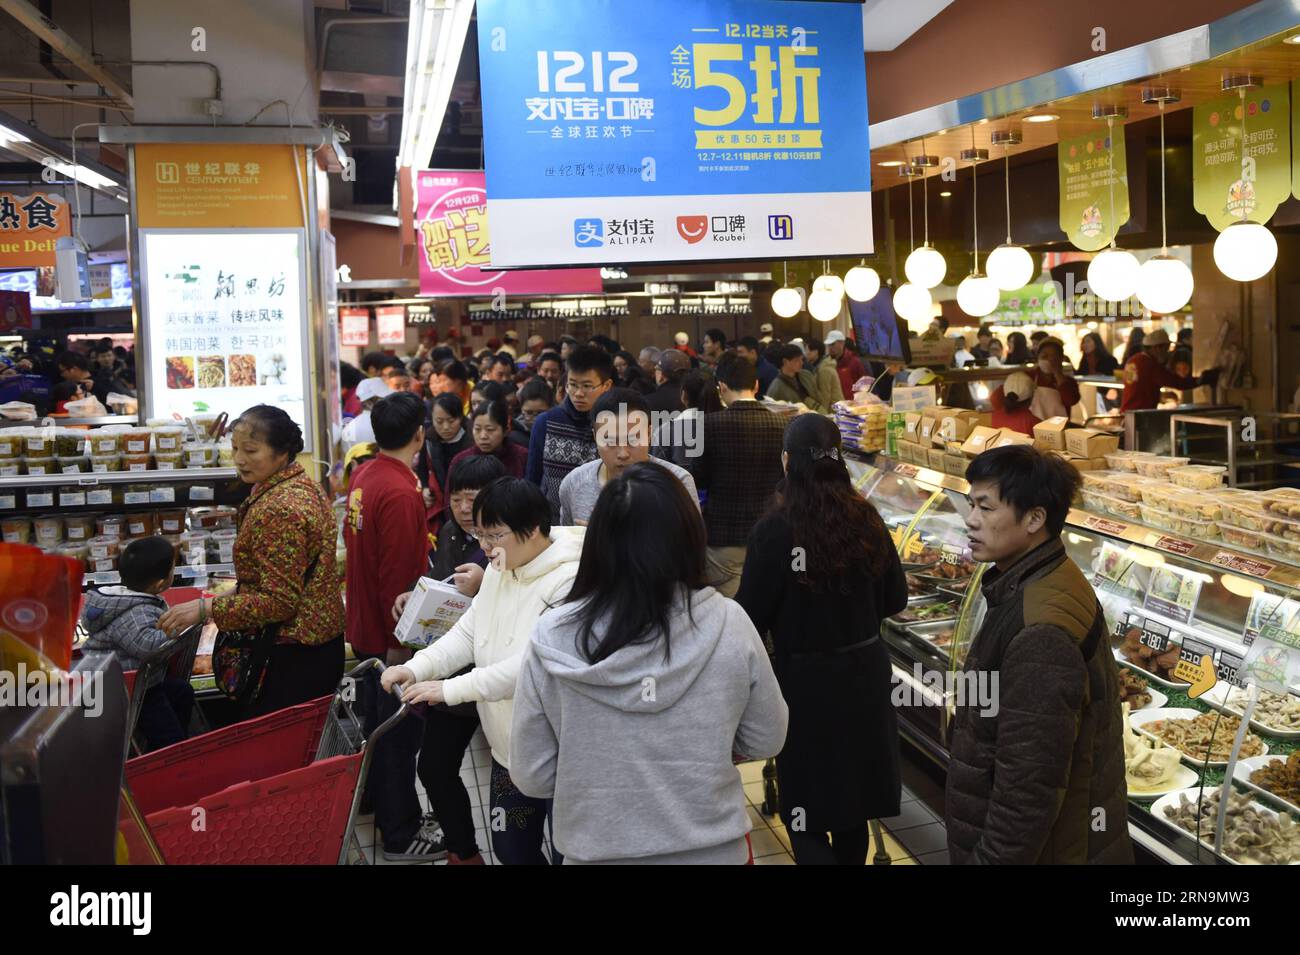 (151212) -- HANGZHOU, Dec. 12, 2015 -- A supermarket is crammed with customers in Hangzhou, capital of east China s Zhejiang Province, Dec. 12, 2015. China s largest online payment platform Alipay and Koubei.com, both belongs to Alibaba Group, joined hands to promote an offline sales promotion, in which customers are entitled to enjoy discount with payment by Alipay. More than 300,000 offline merchants at home and abroad took part in the event. ) (lfj) CHINA-ALIBABA-OFFLINE PROMOTION (CN) JuxHuanzong PUBLICATIONxNOTxINxCHN   151212 Hangzhou DEC 12 2015 a Supermarket IS crammed With customers i Stock Photo